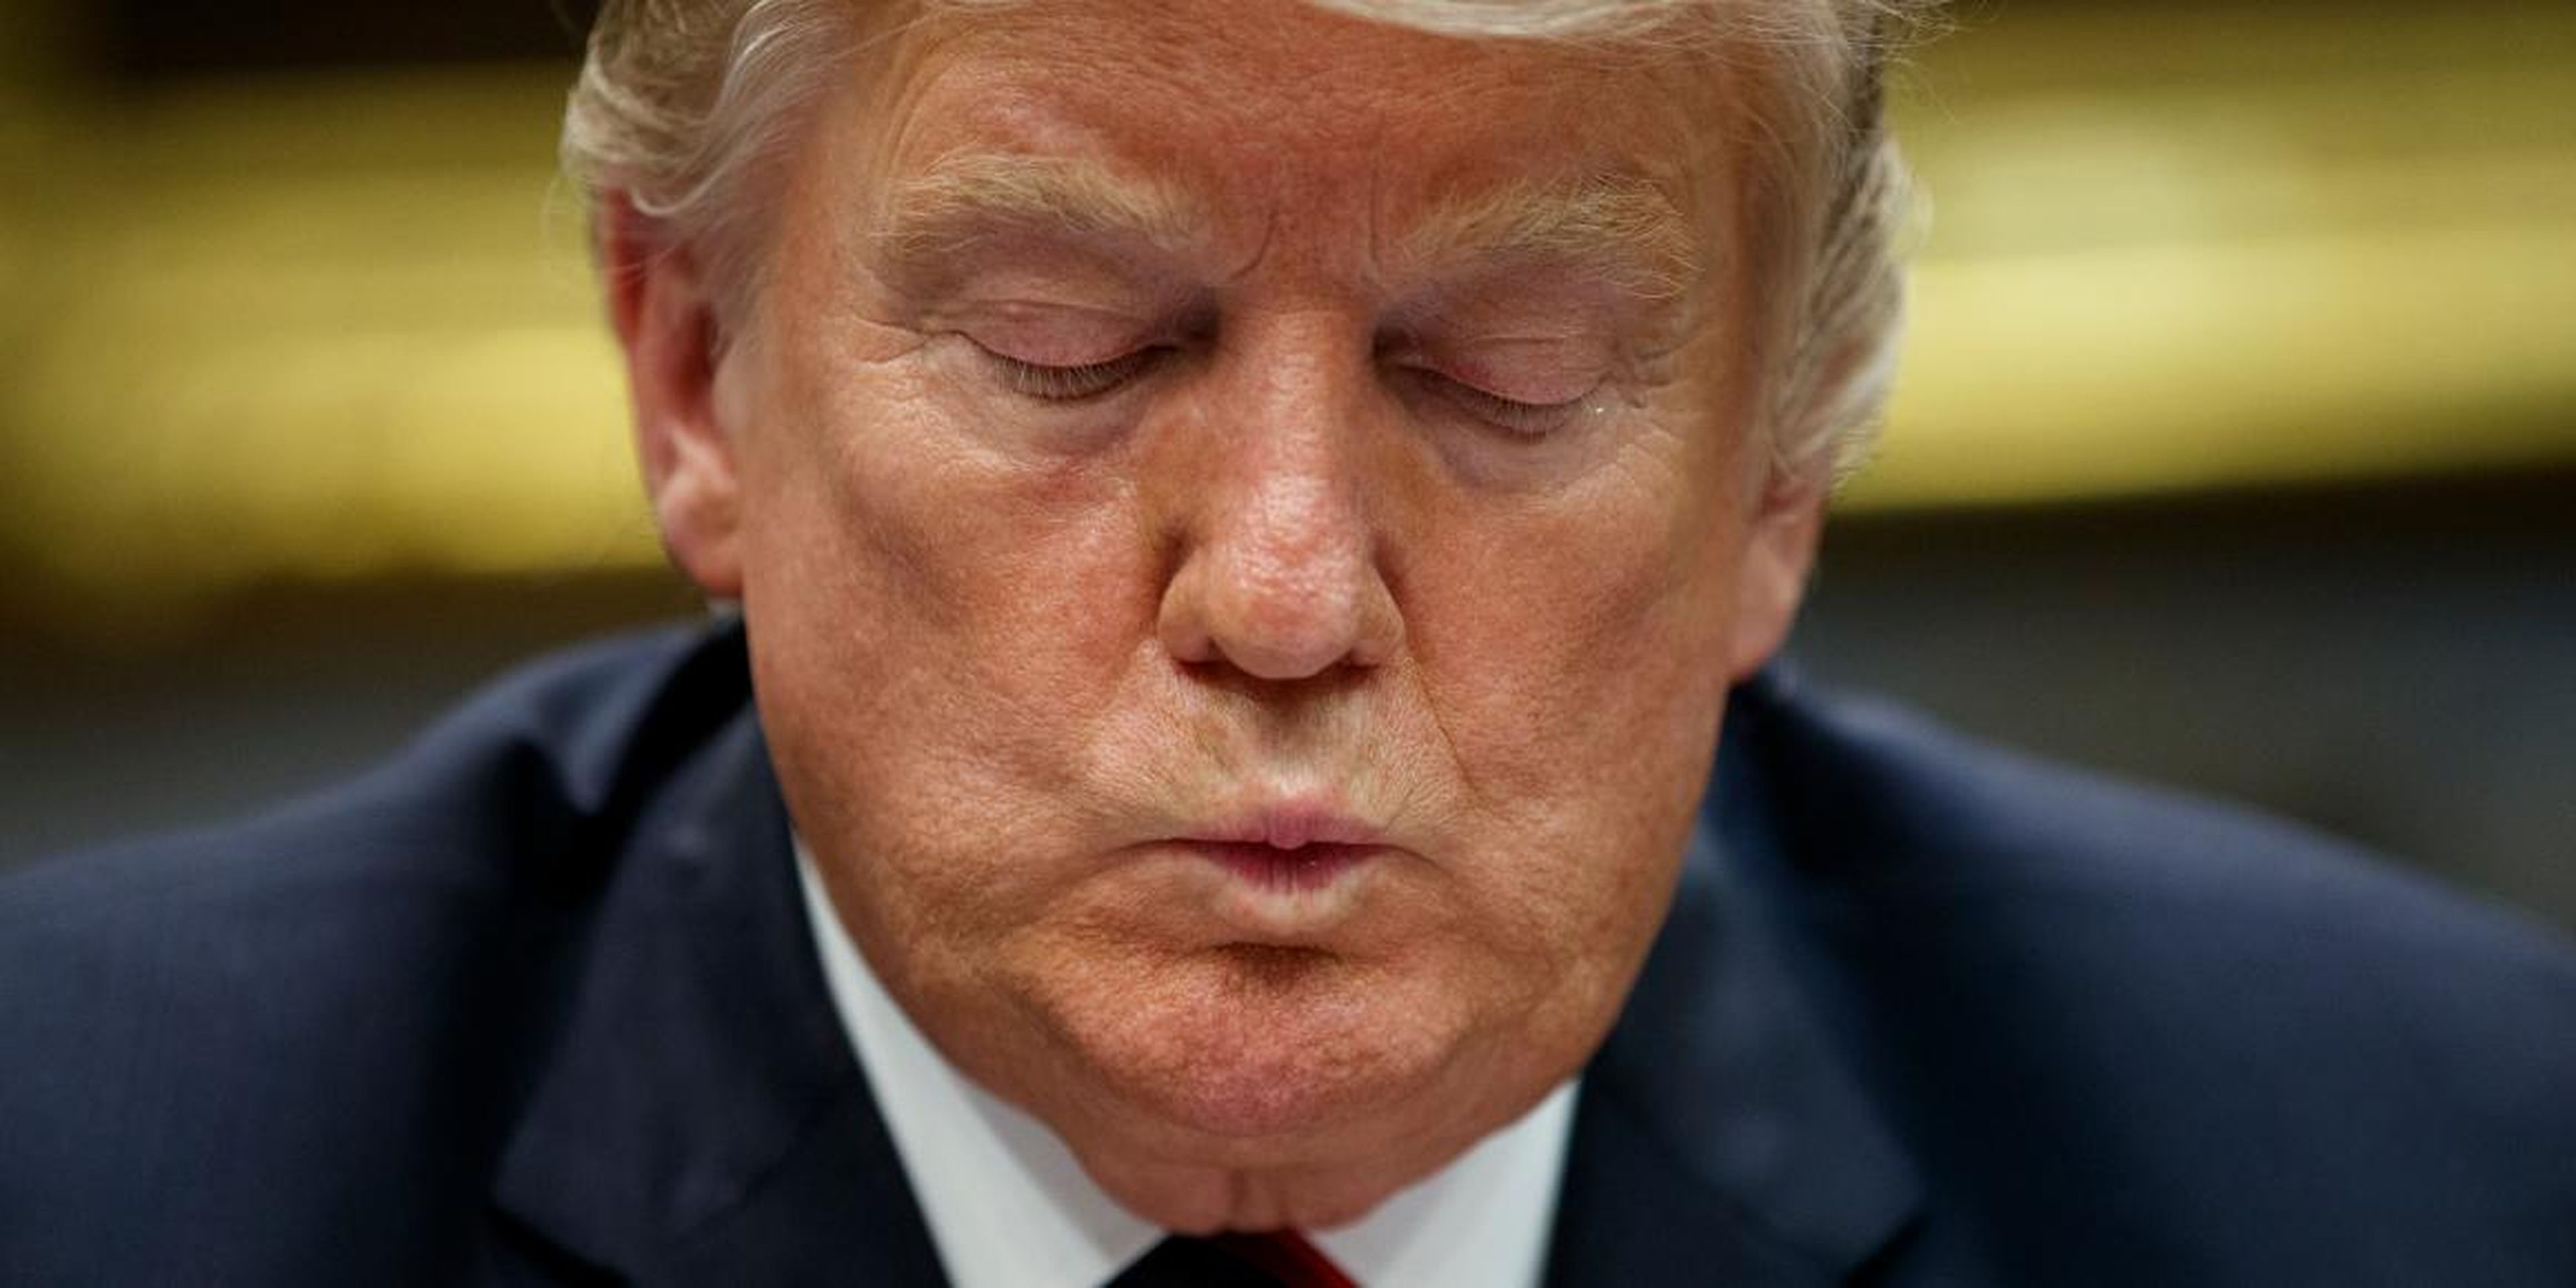 President Donald Trump listens during a briefing on drug trafficking at the southern border in the Roosevelt Room of the White House, Wednesday, March 13, 2019, in Washington. Trump said during the event the U.S. is issuing an